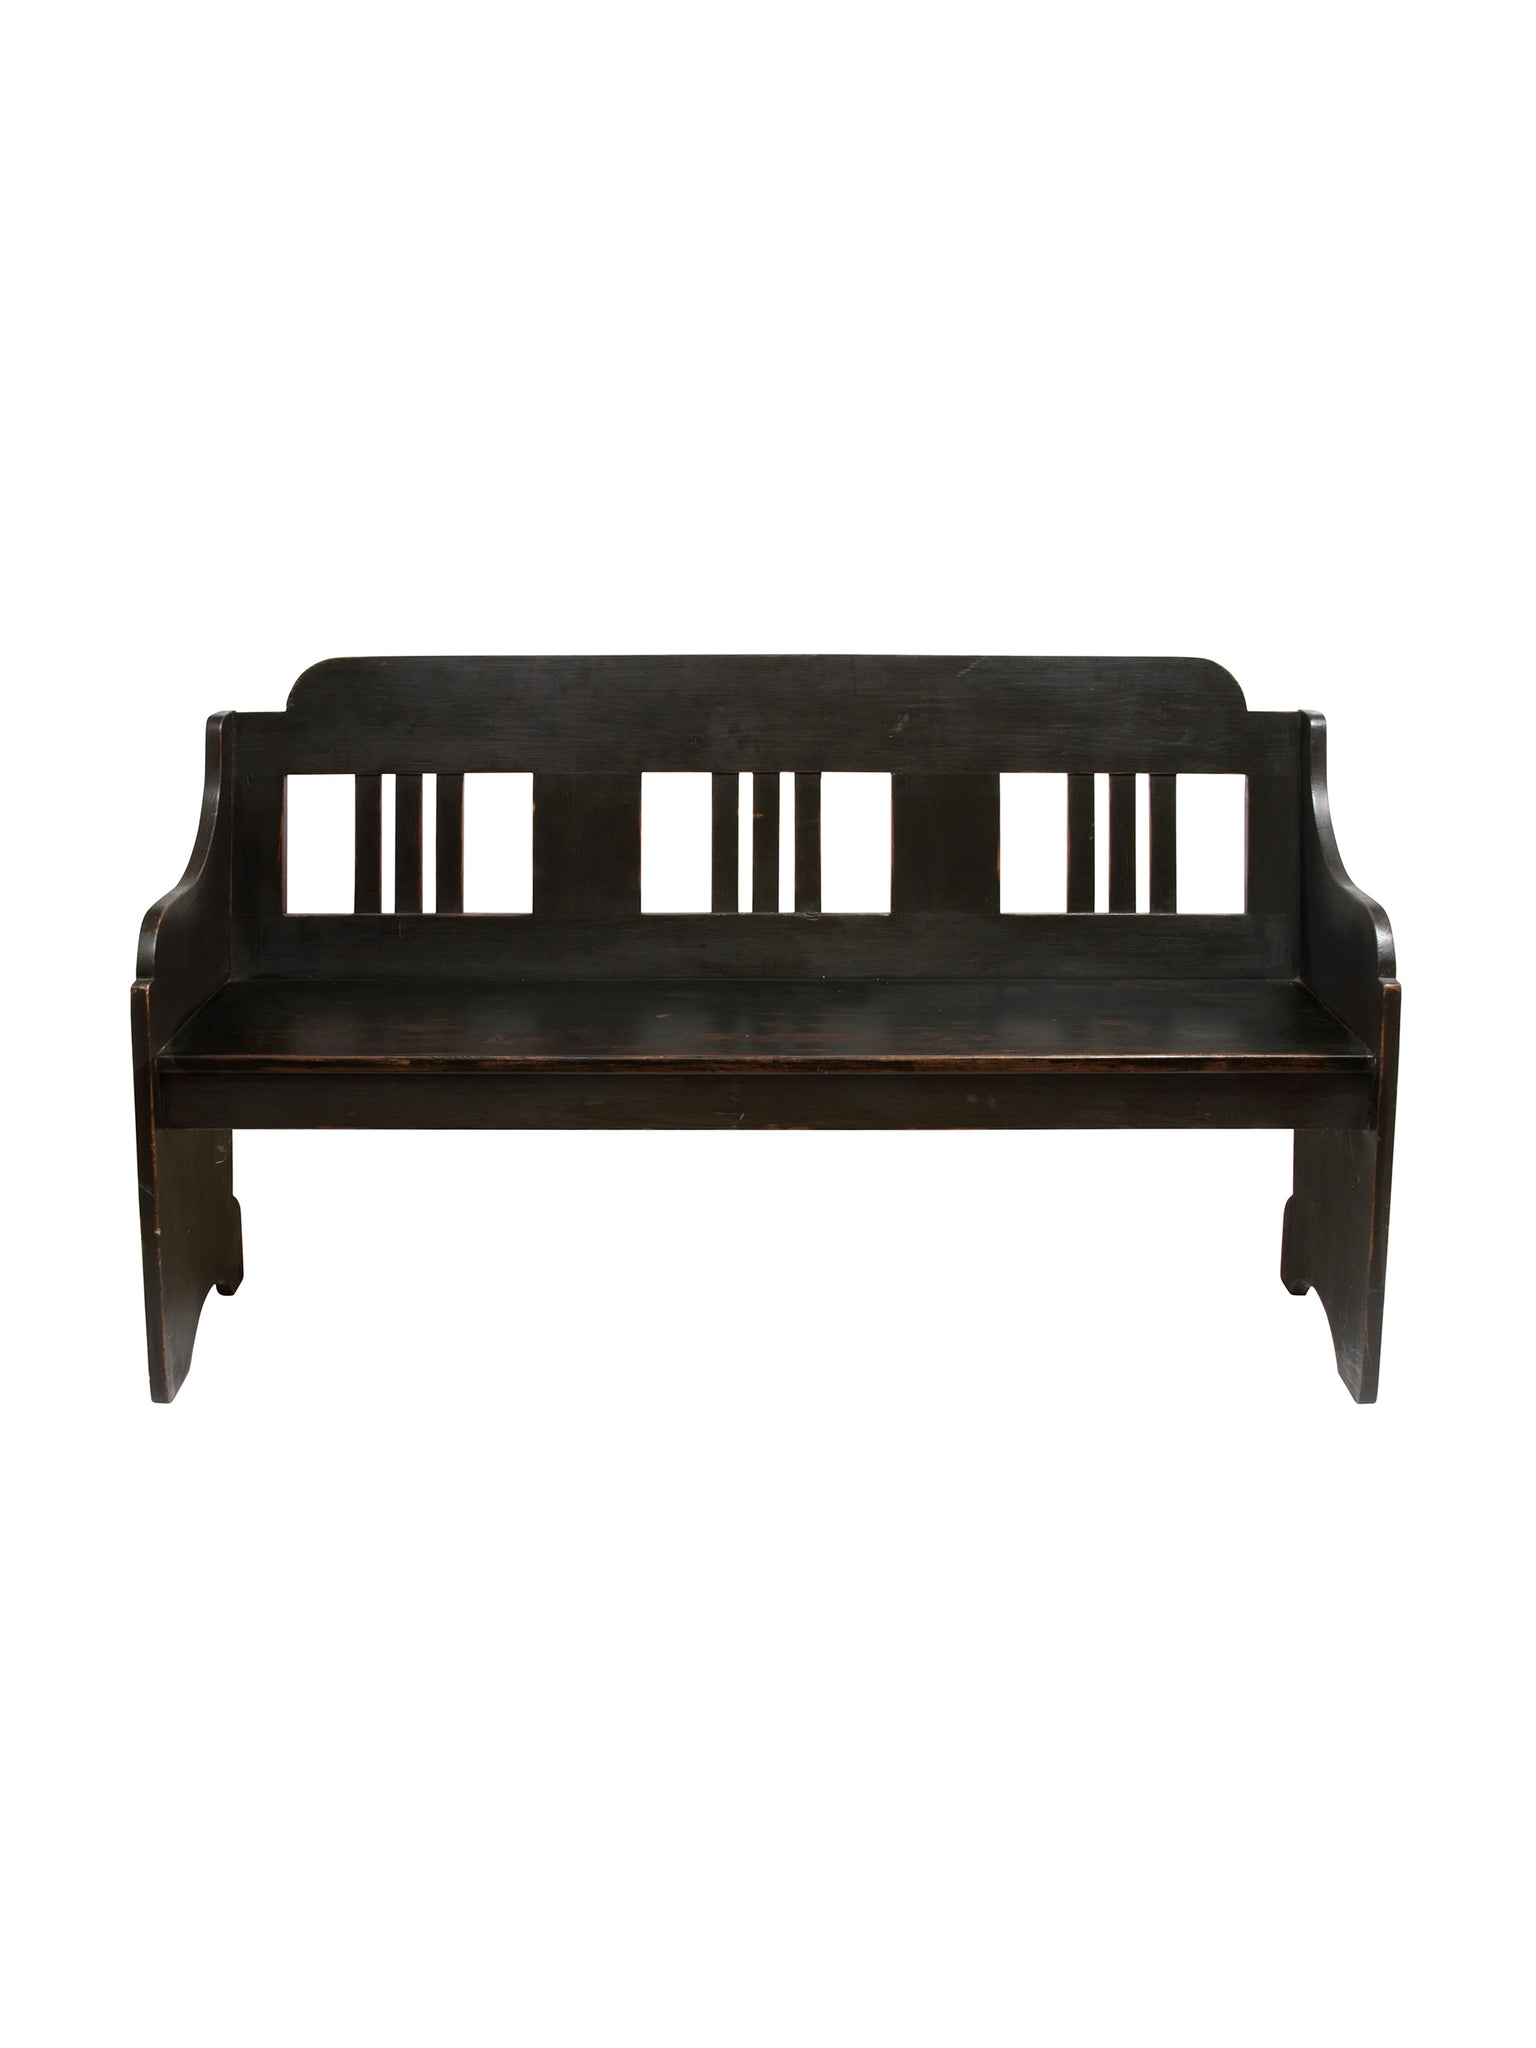 Vintage 1900 French Black Painted Bench Weston Table